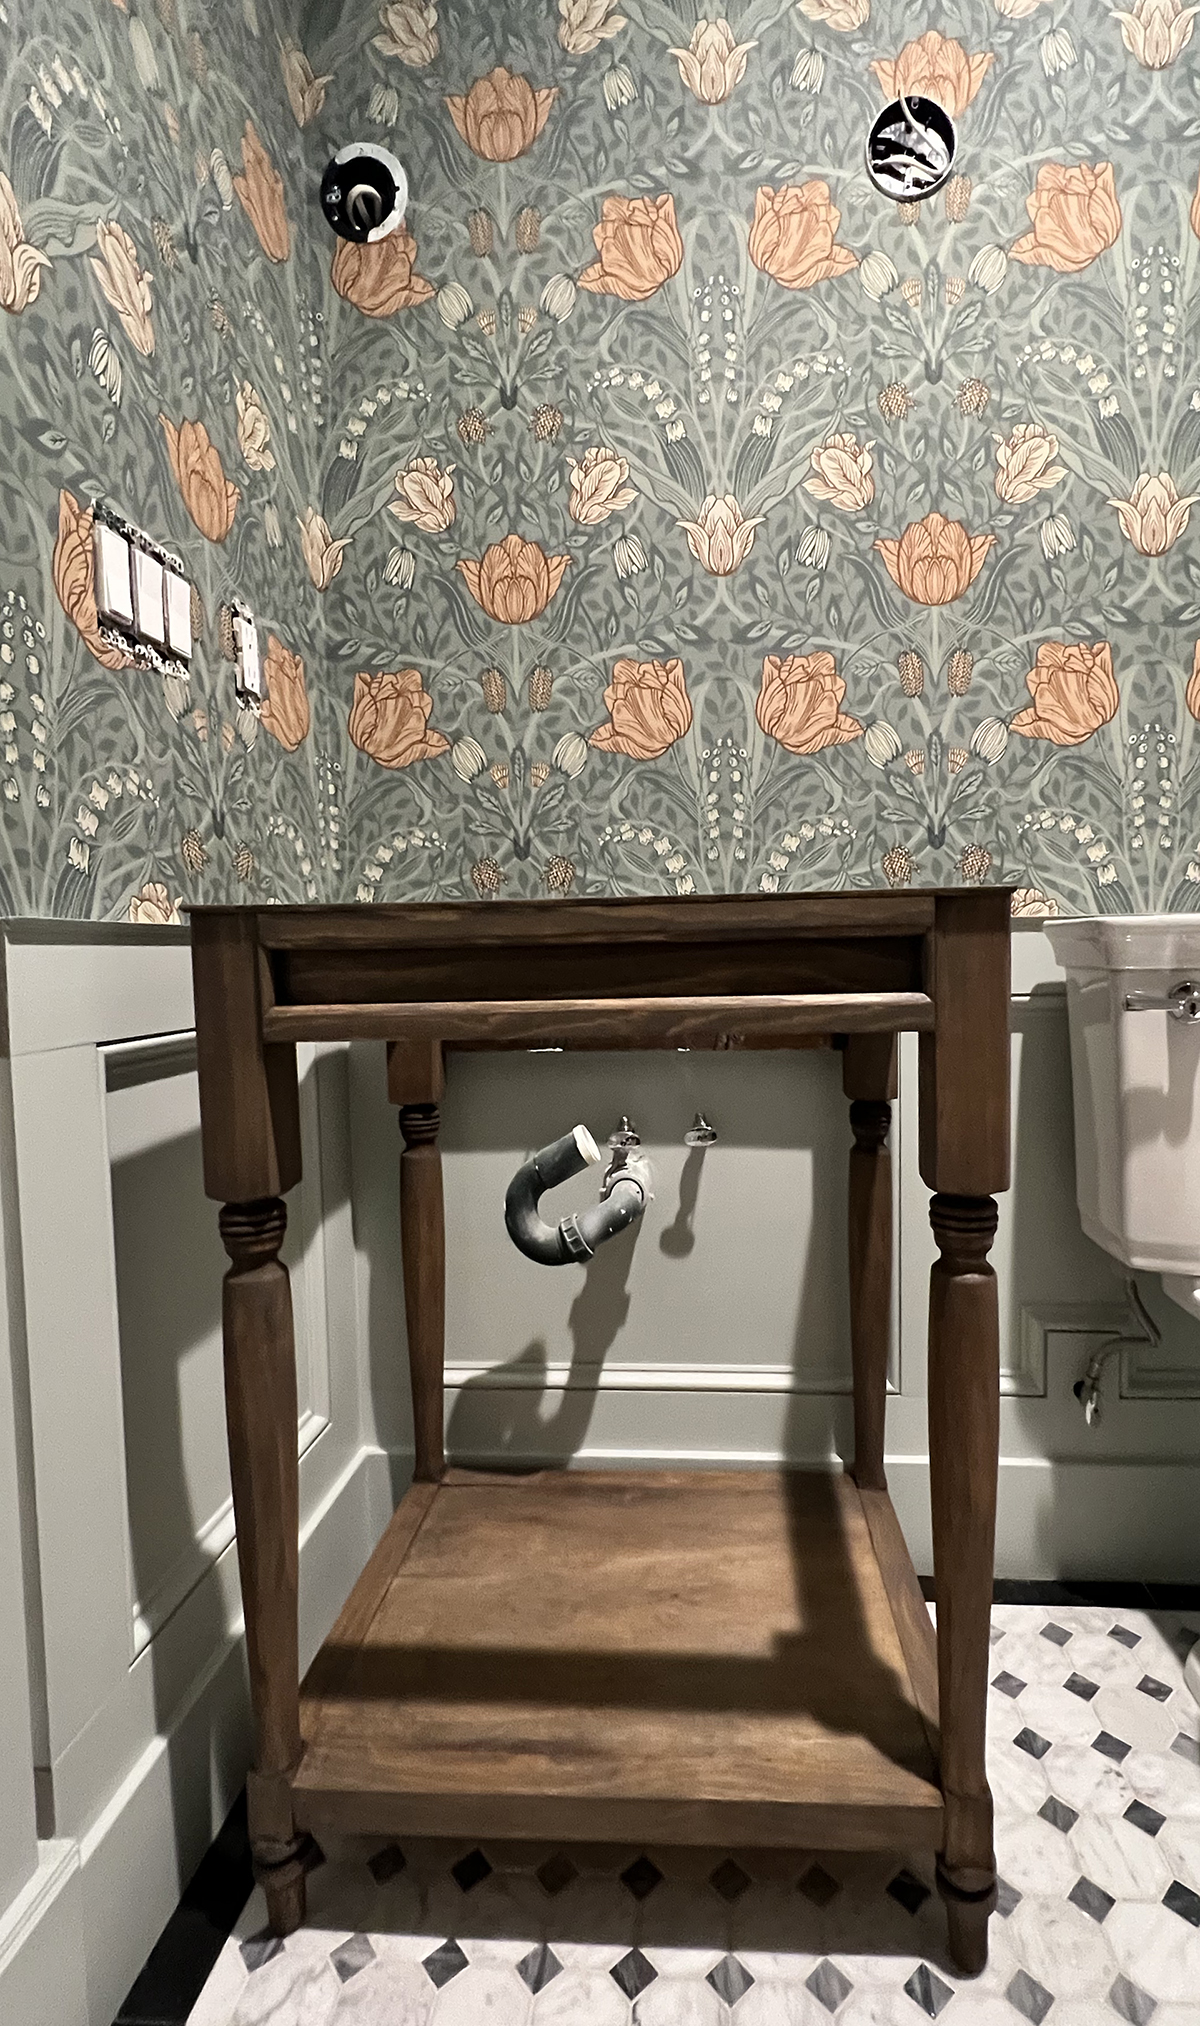 medium wood stained vanity in a weathered finish placed in front of sage green floral wallpaper and a diy wainscoting panel wall